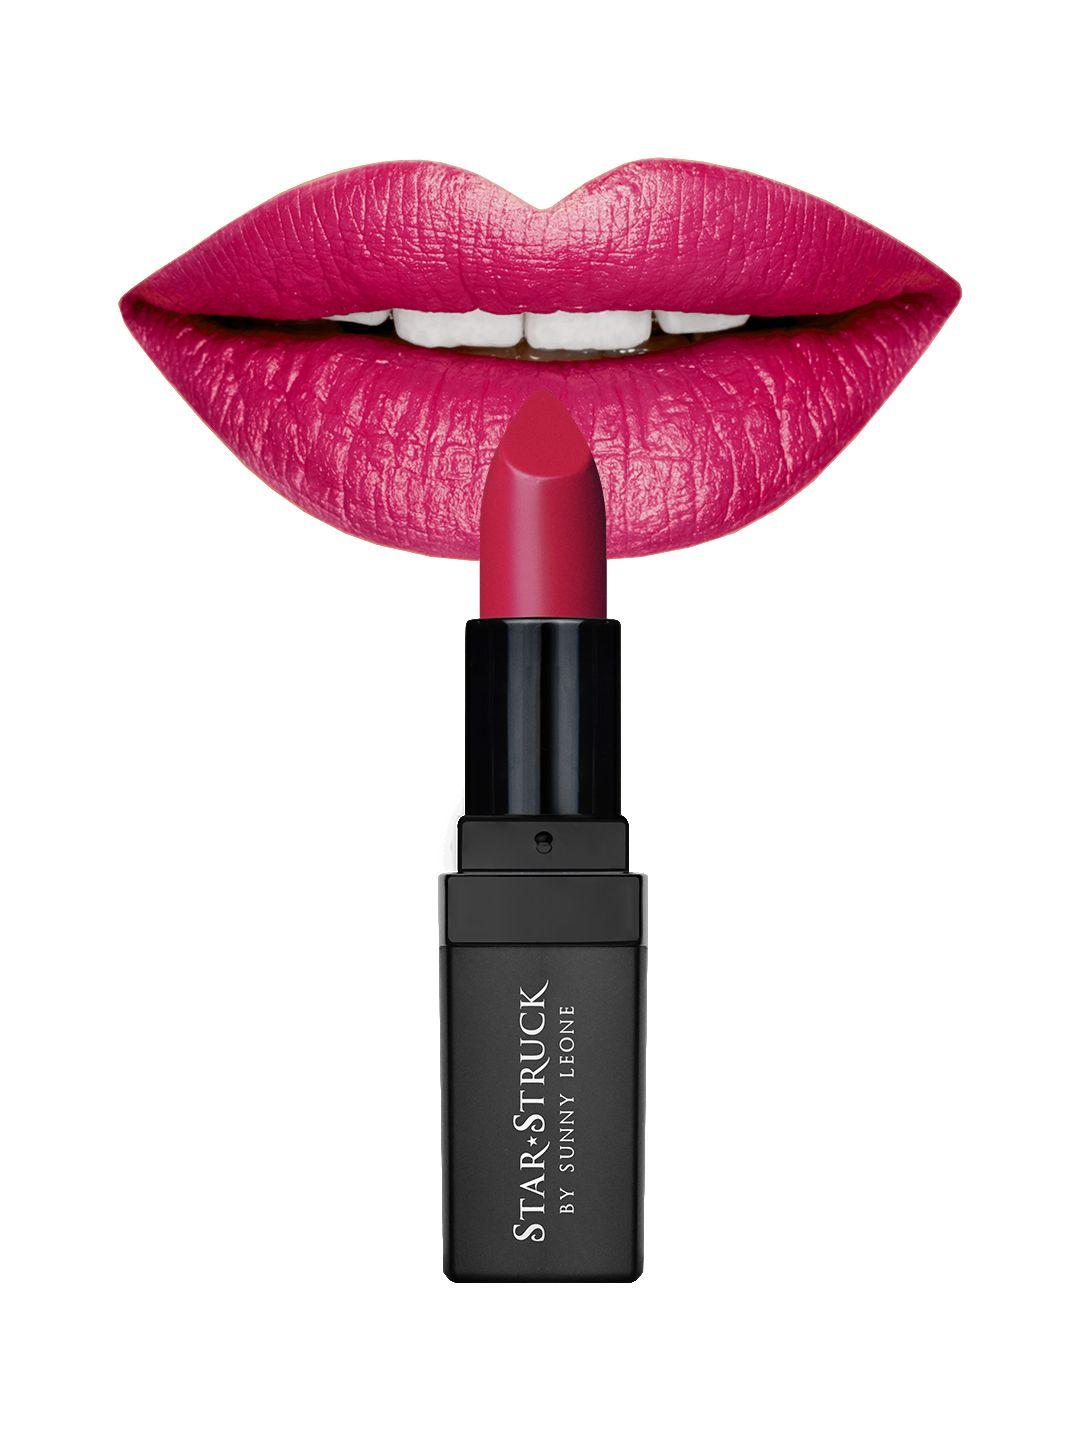 star struck by sunny leone women intense matte lip color- rooberry